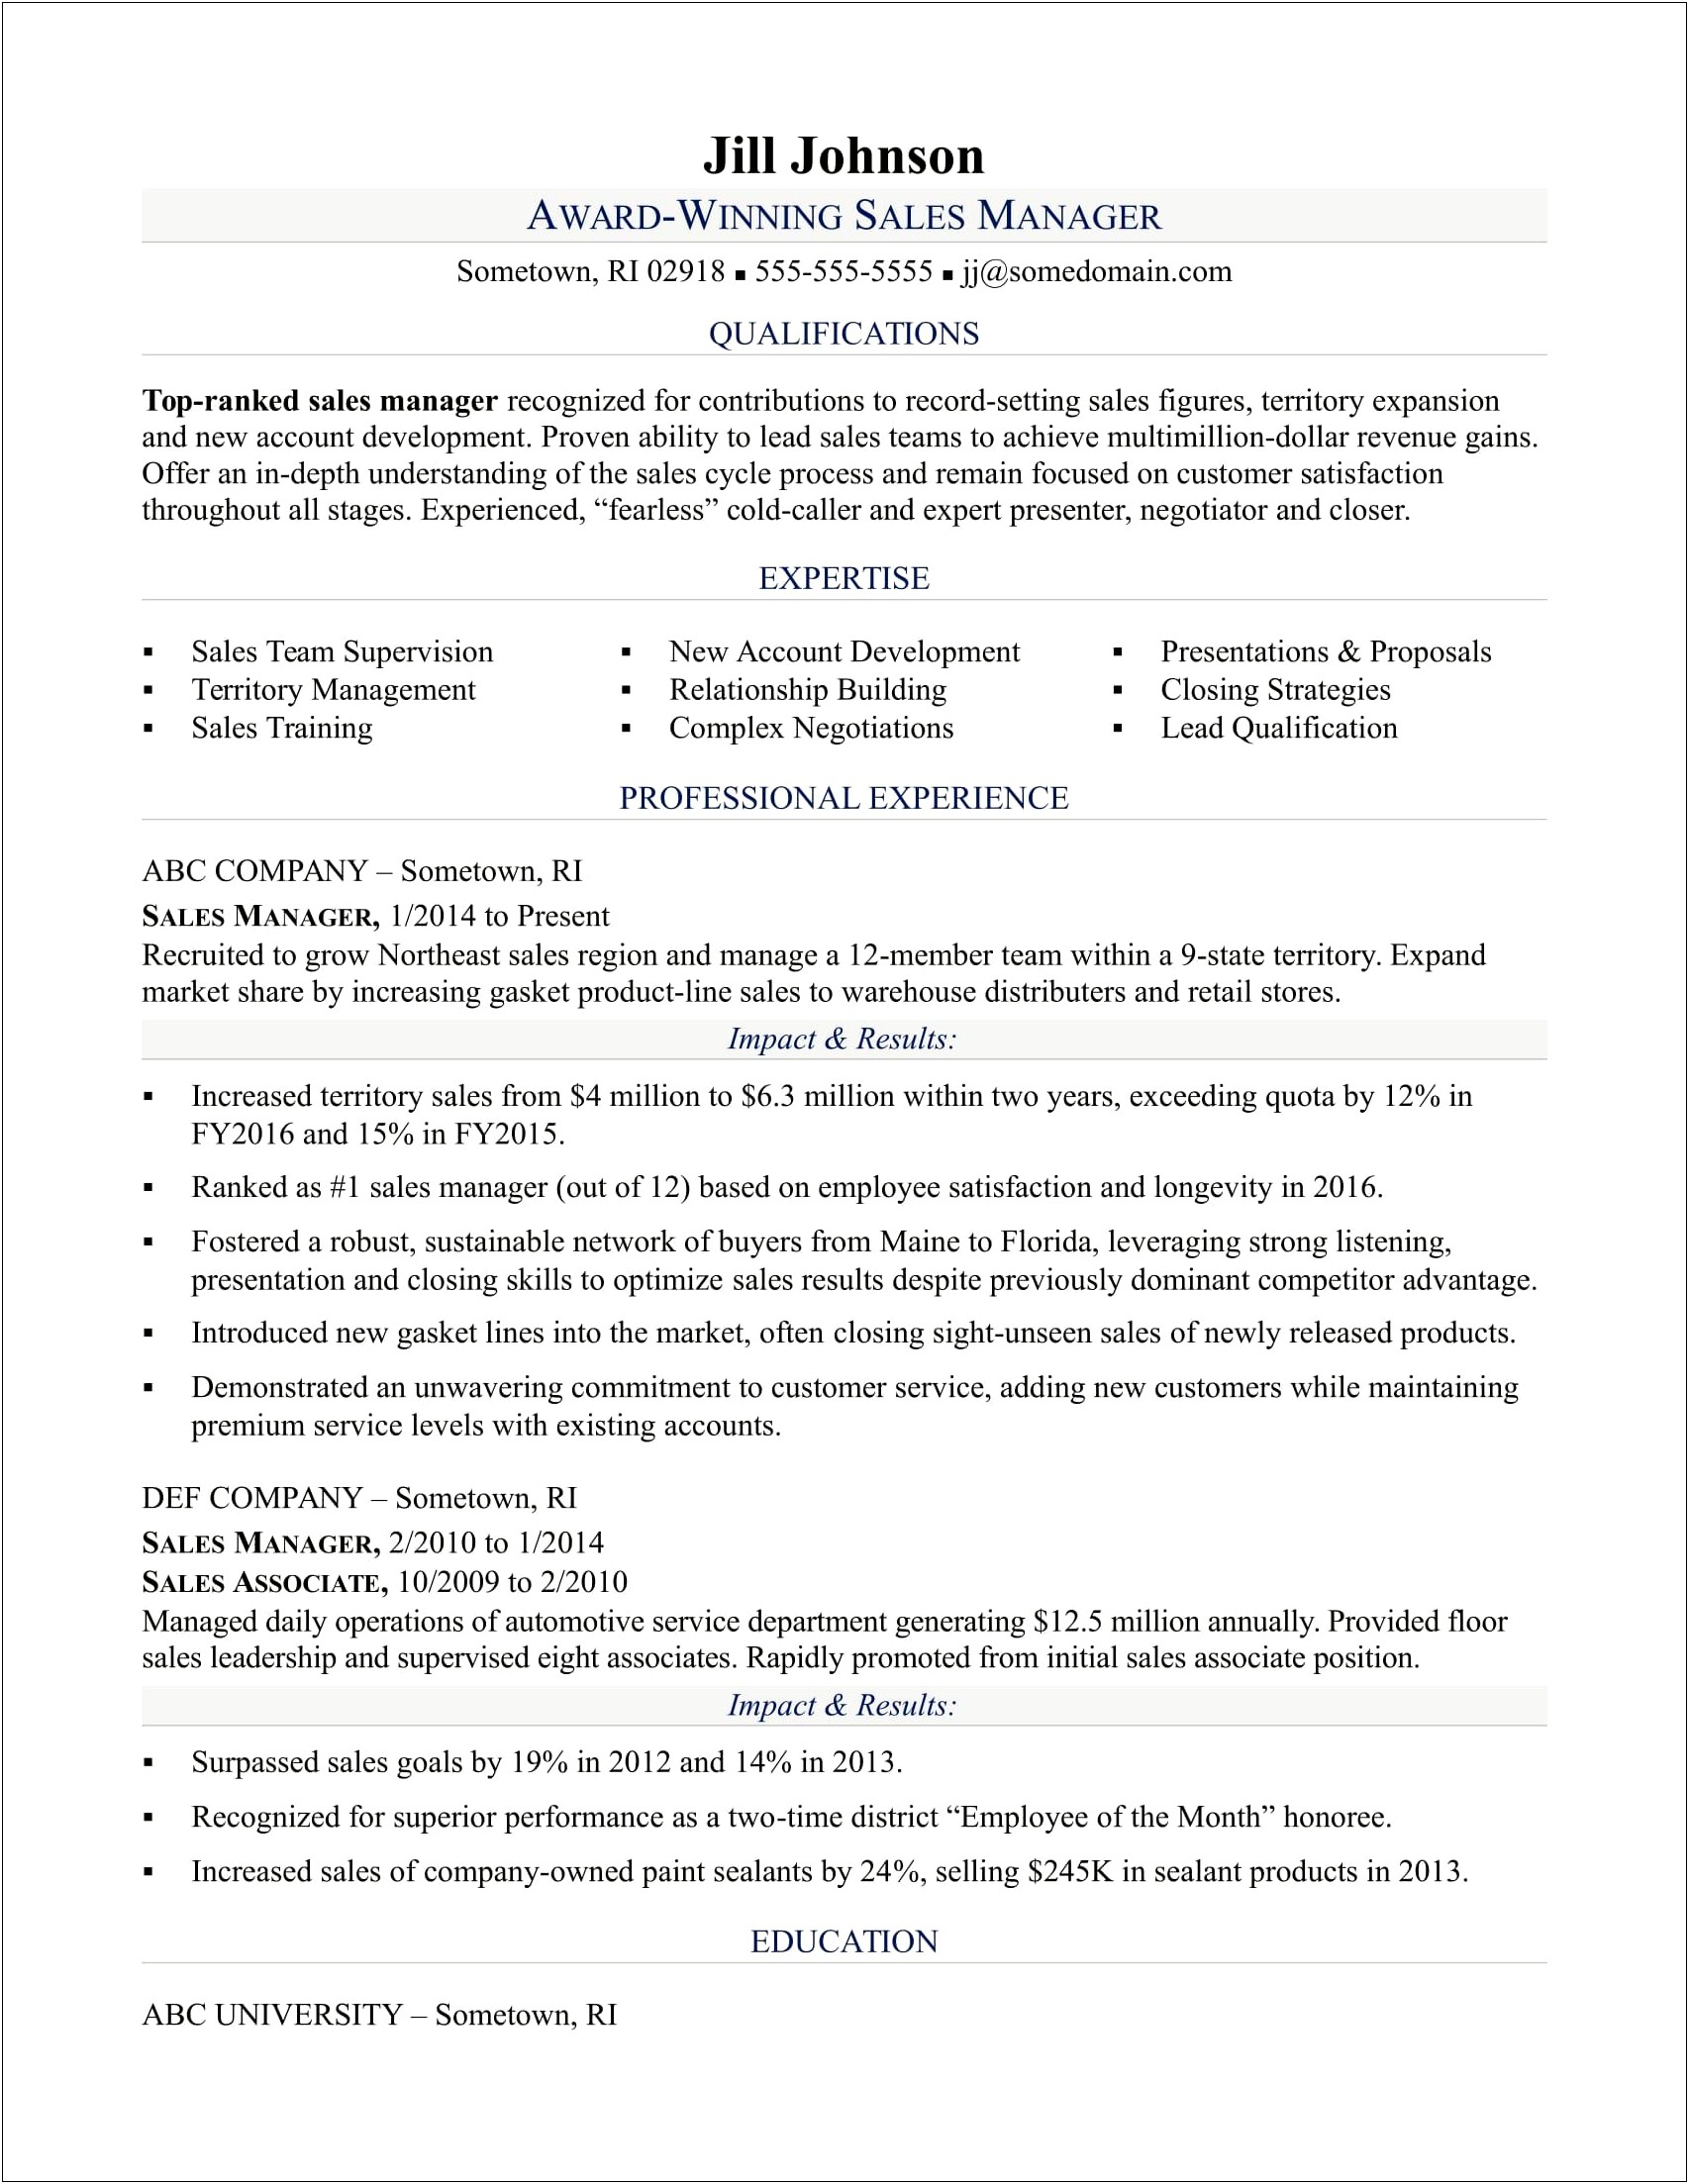 Resume Examples 2019 For Professionals